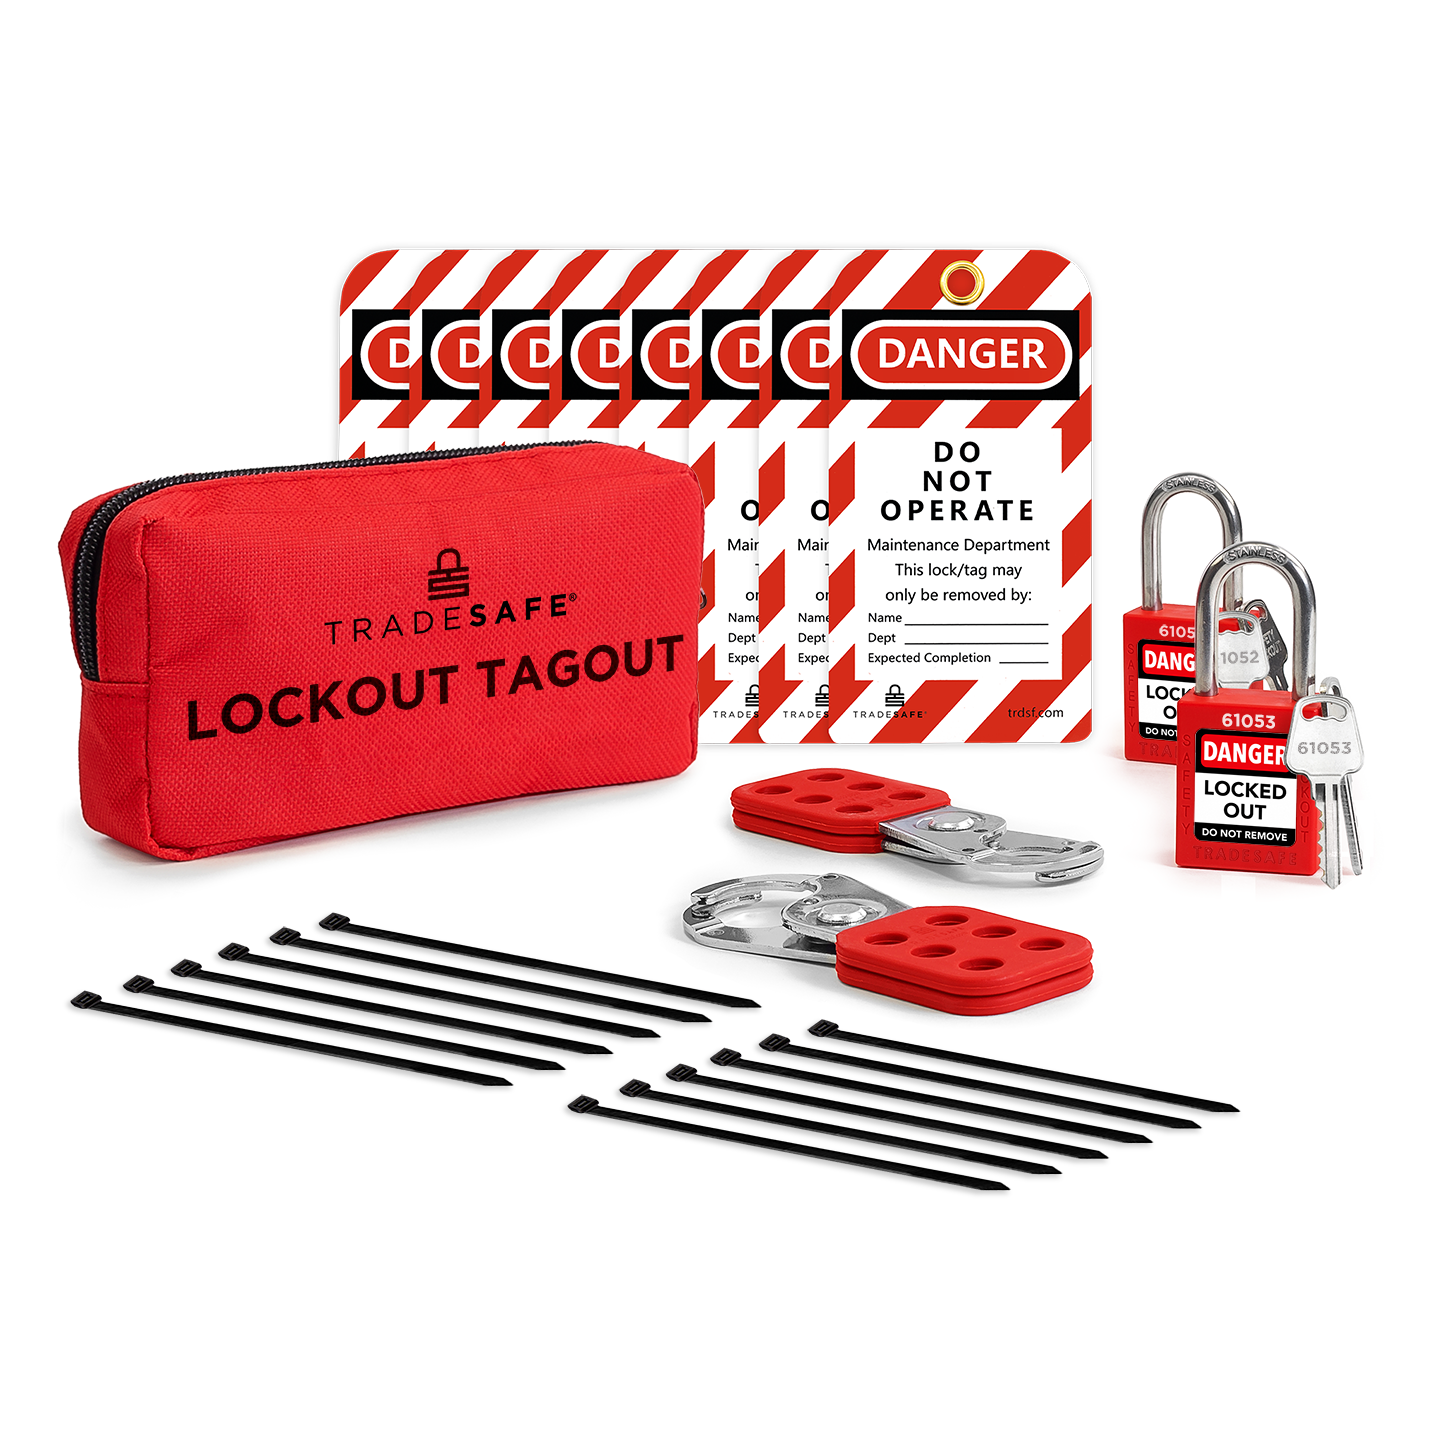 lockout tagout kit composed of 1 pouch, 12 zip ties, 2 steel hasps, 8 loto tags, and 2 keyed different padlocks with 2 keys each